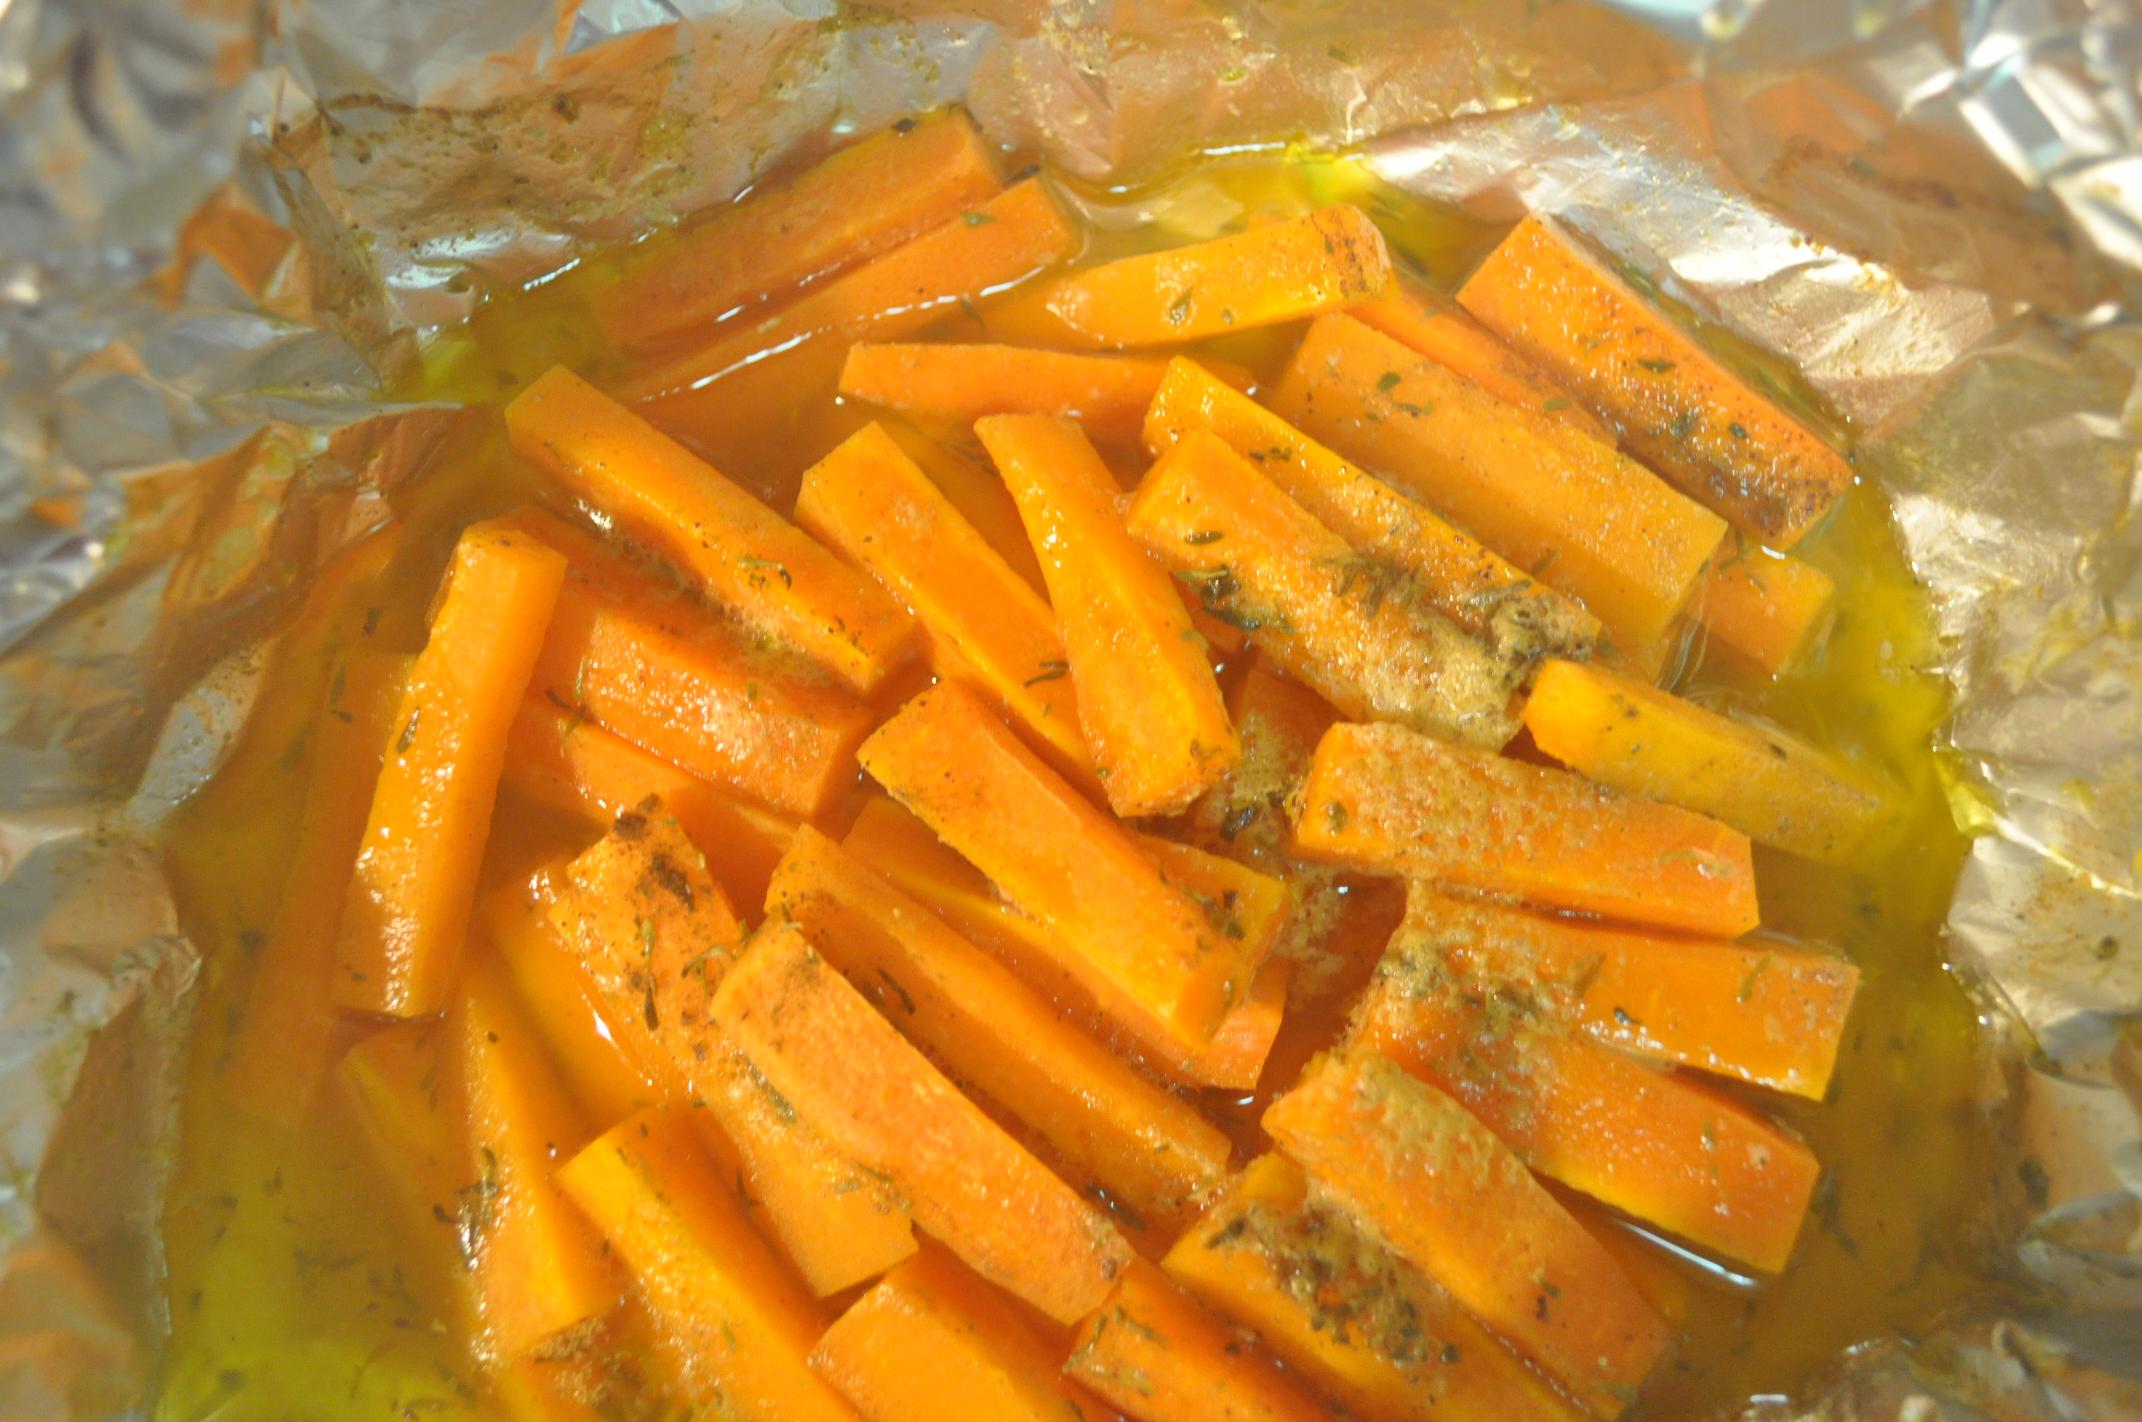  Aromatic cumin and thyme blend perfectly with sweet carrots in this dish.